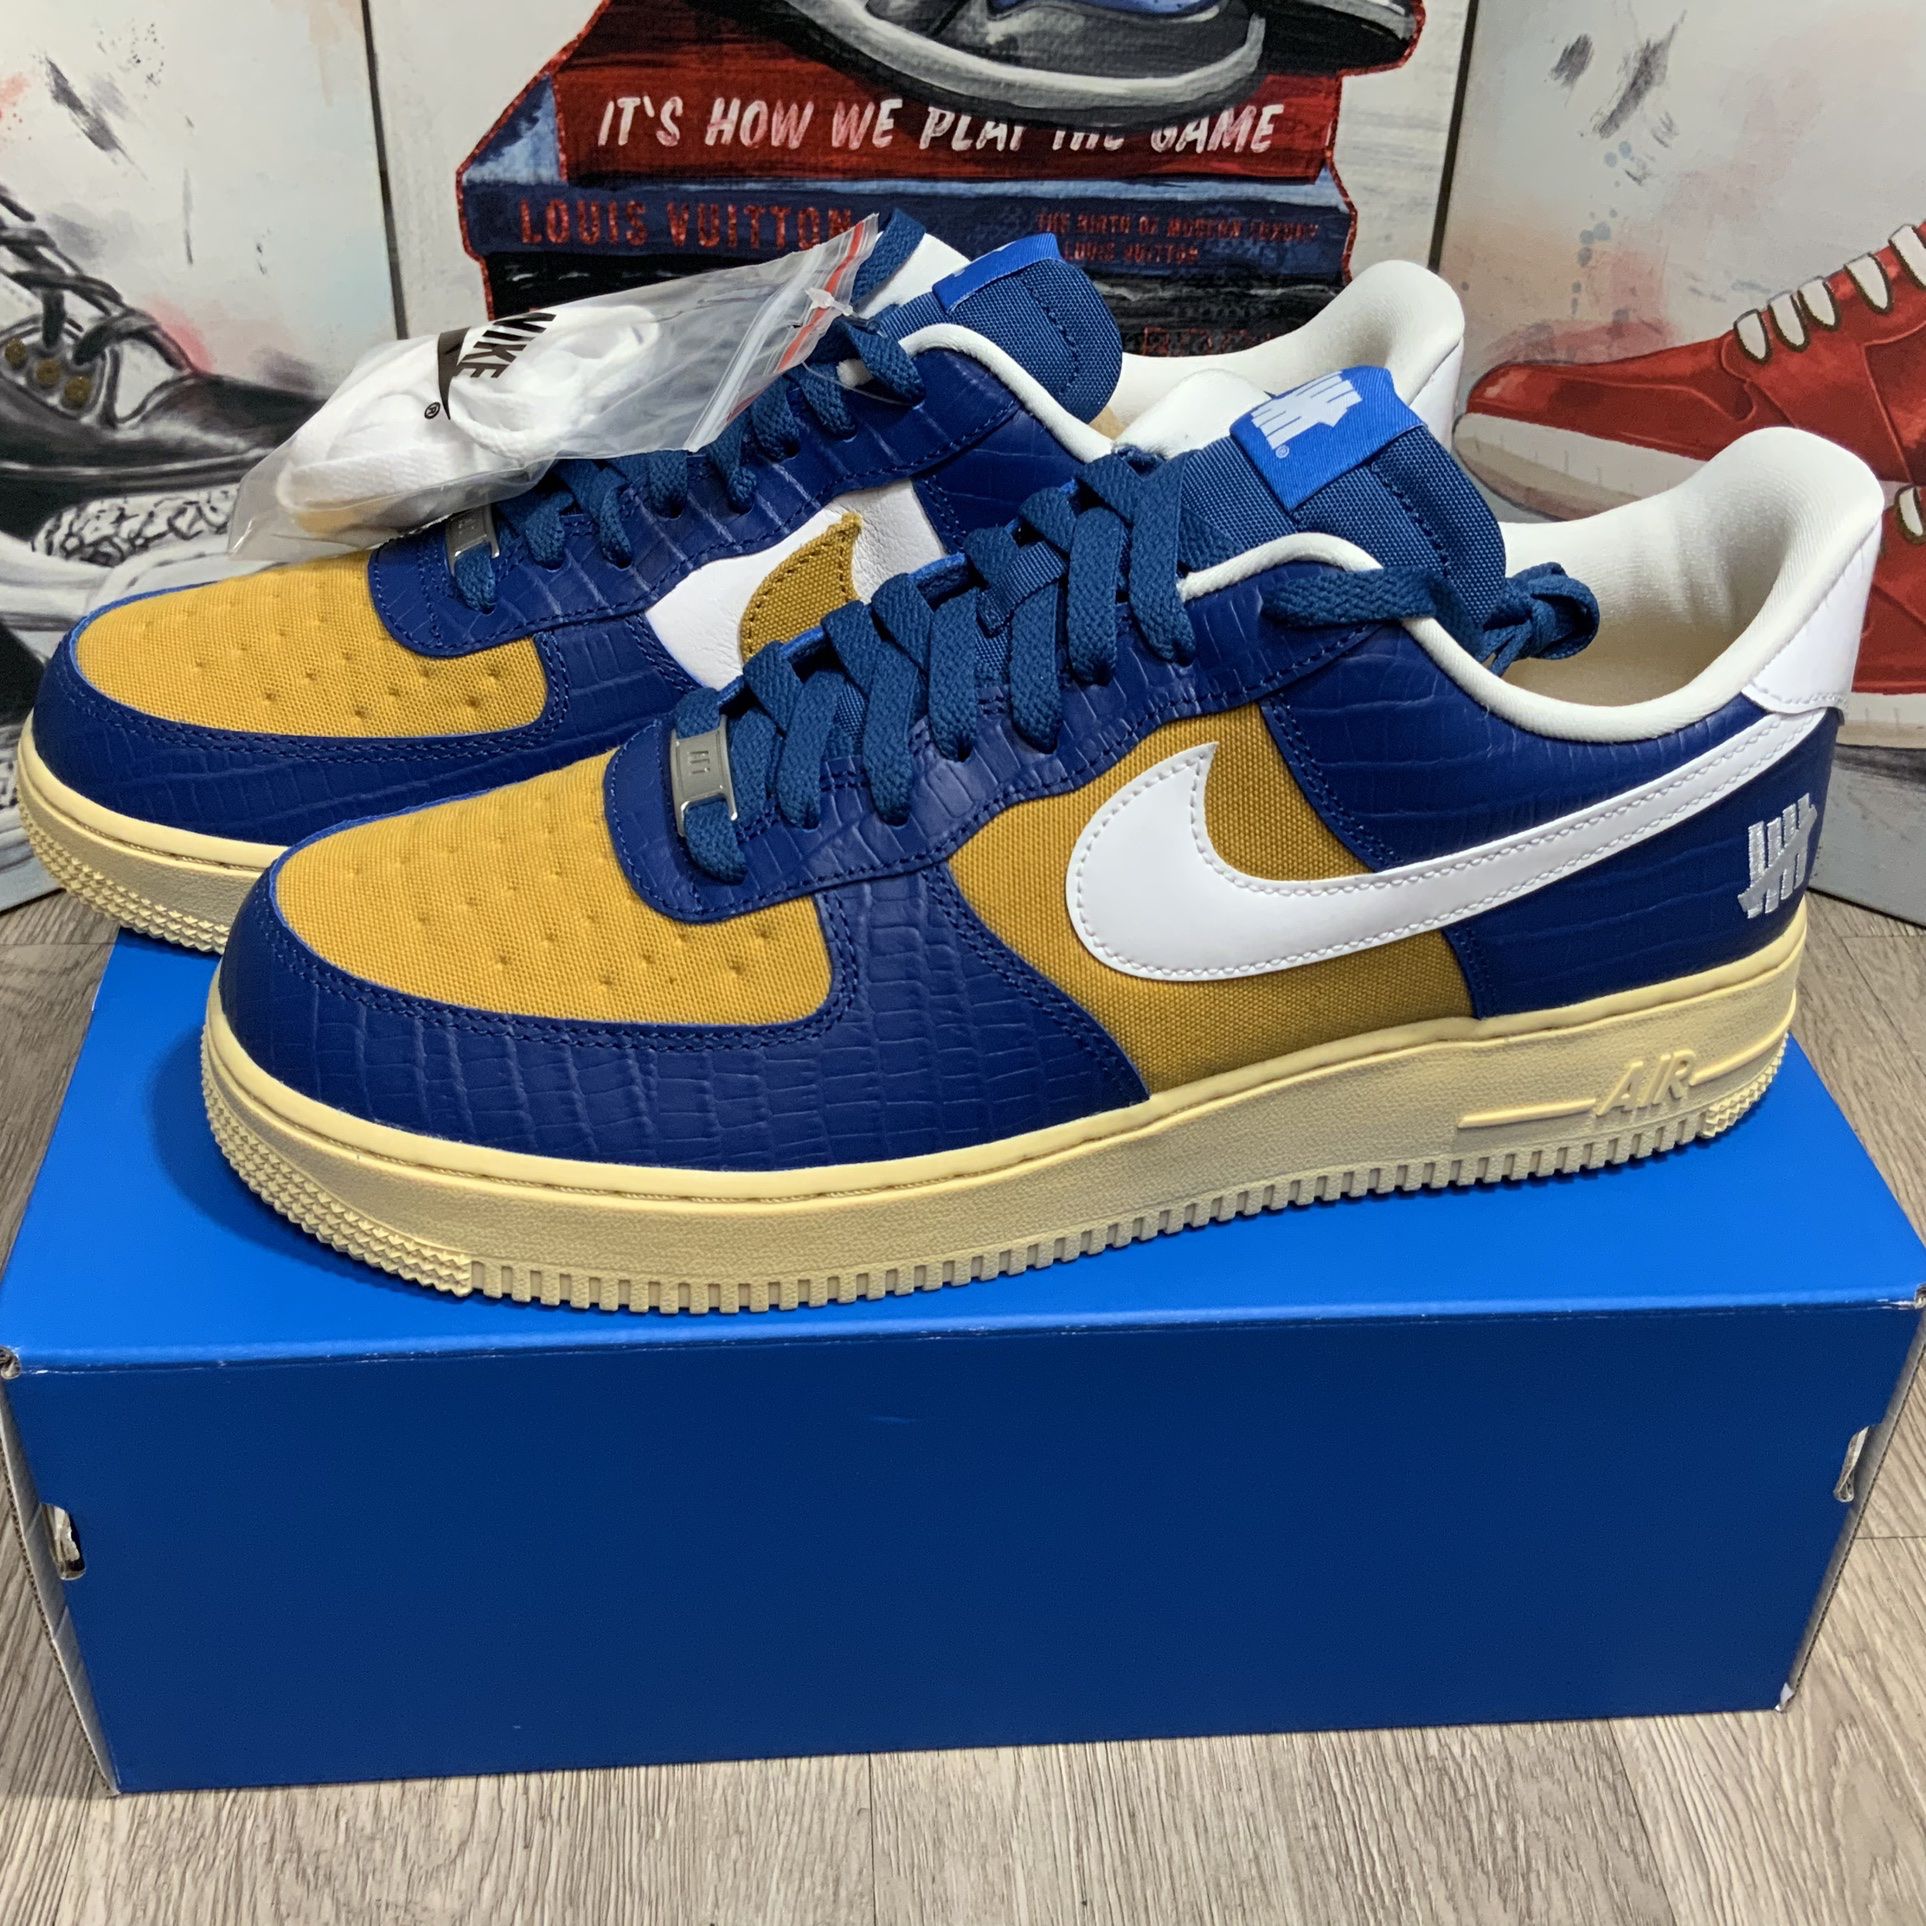 Nike Air Force 1 Low SP x Undefeated 5 On It Blue Croc DM8462-400 